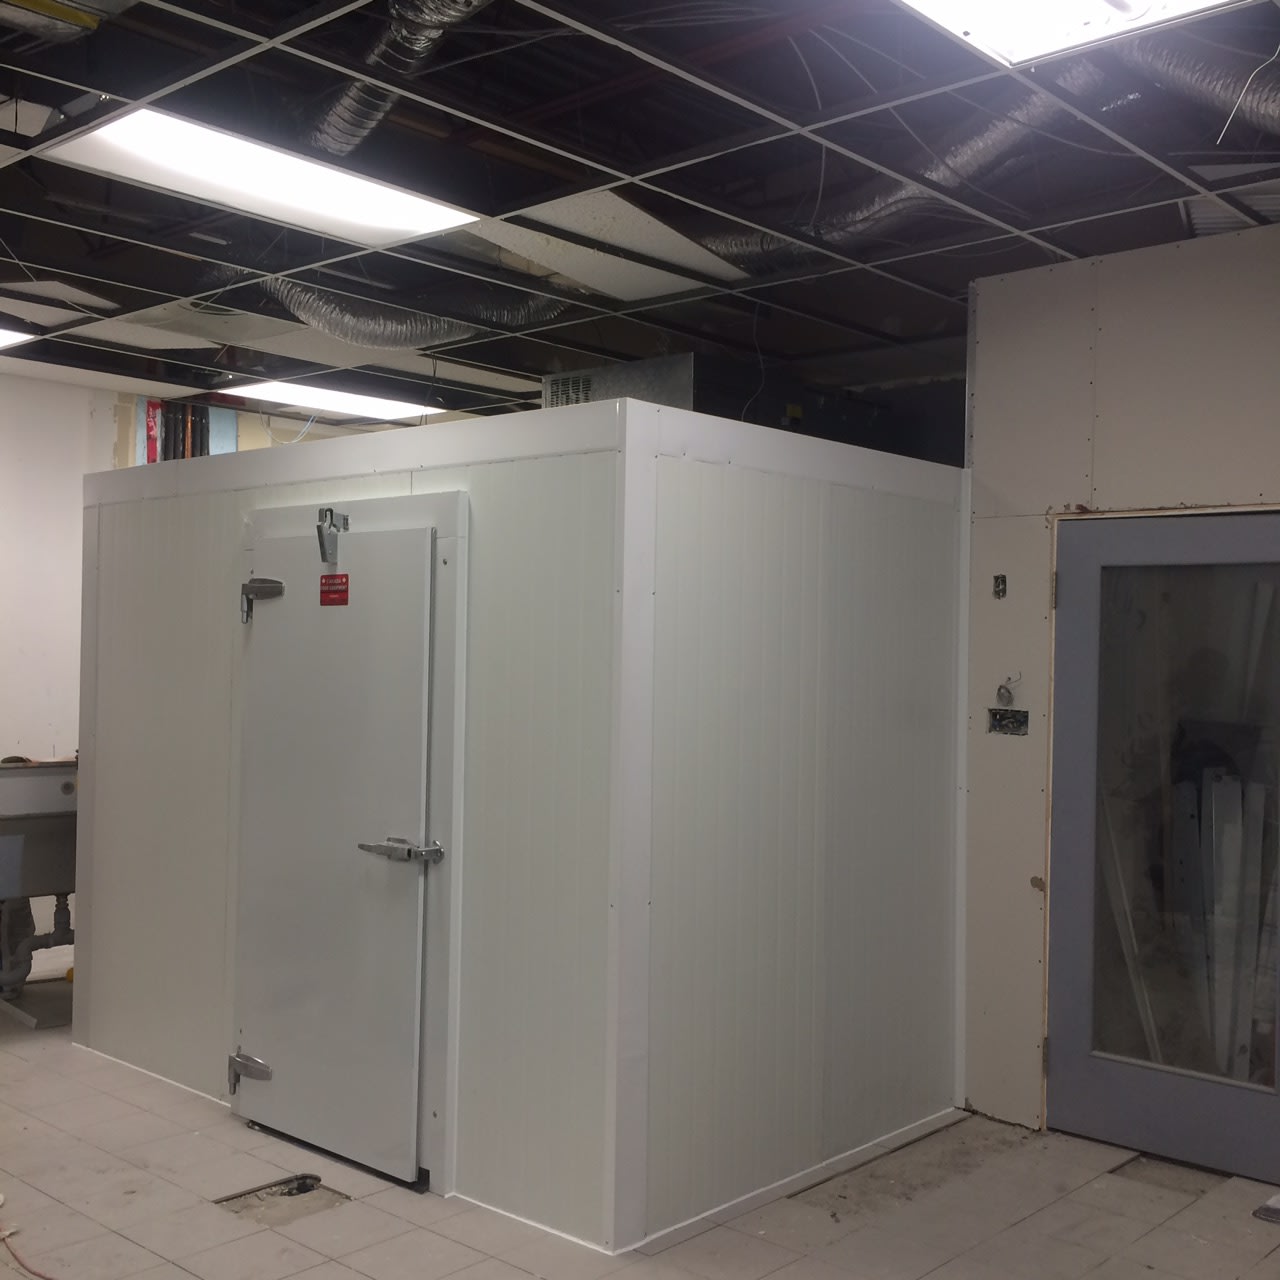 10x10x8H Walk-In Cooler - Used Self Contained System (NEW SD) - C10108SDUSC